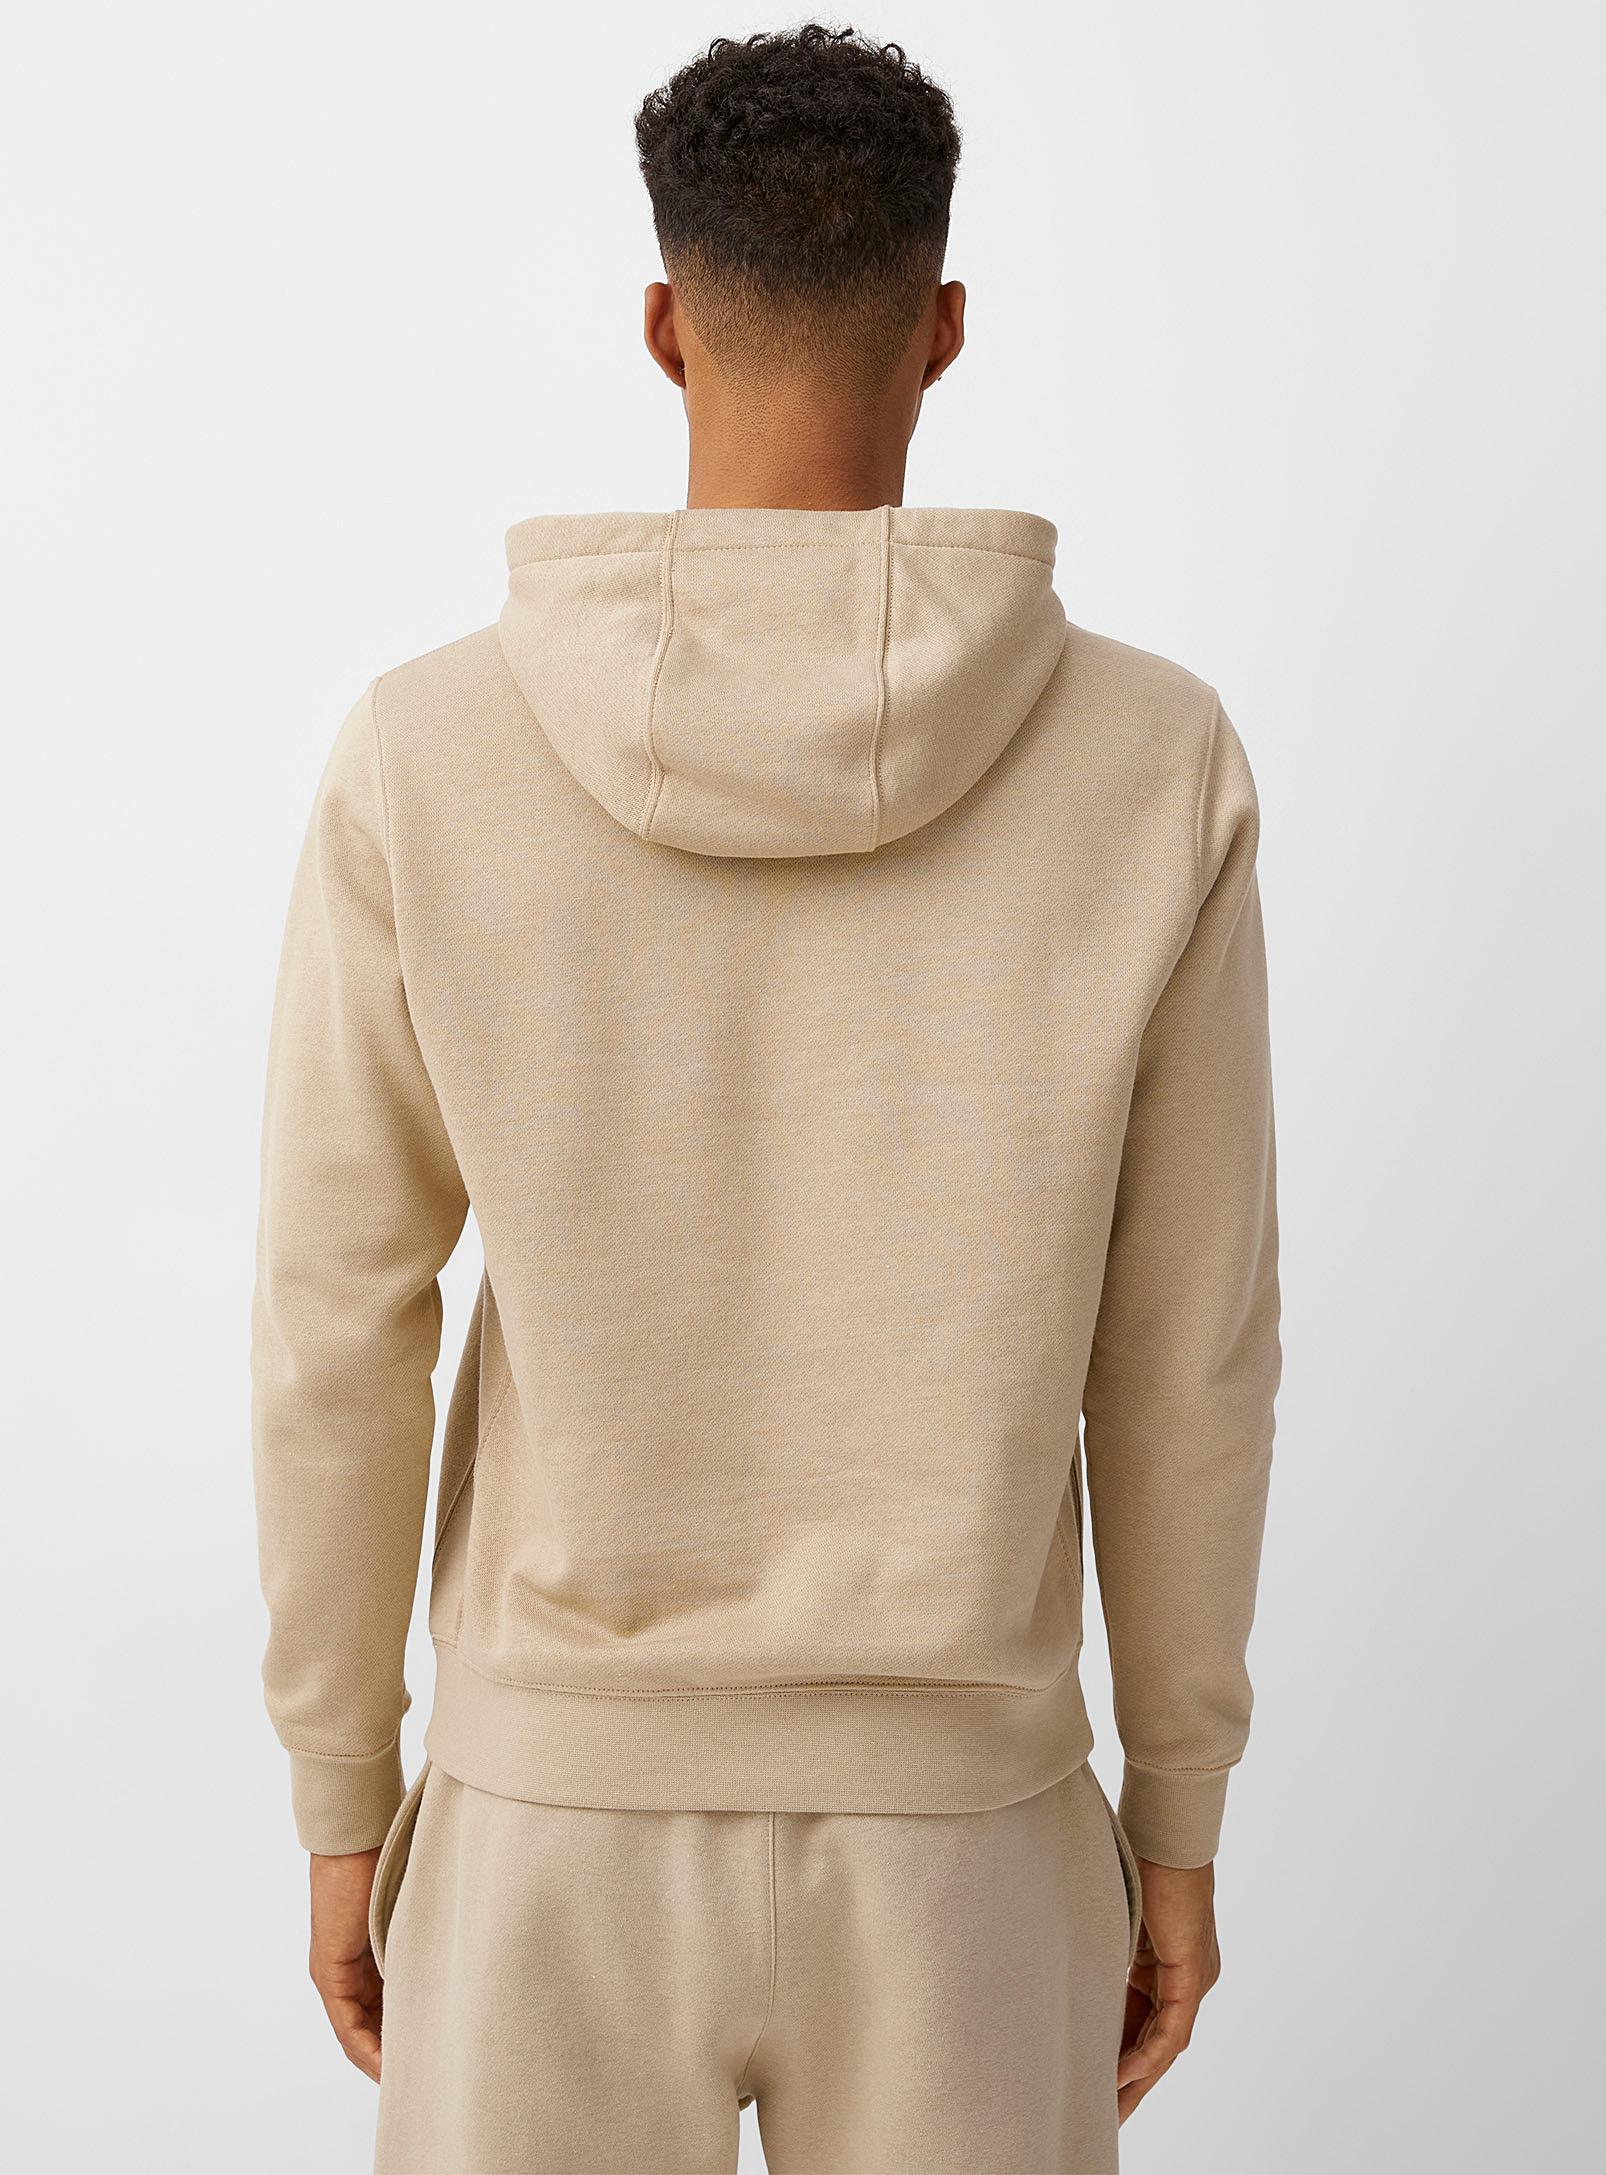 Nike Embroidered Swoosh Hoodie in Natural for Men | Lyst